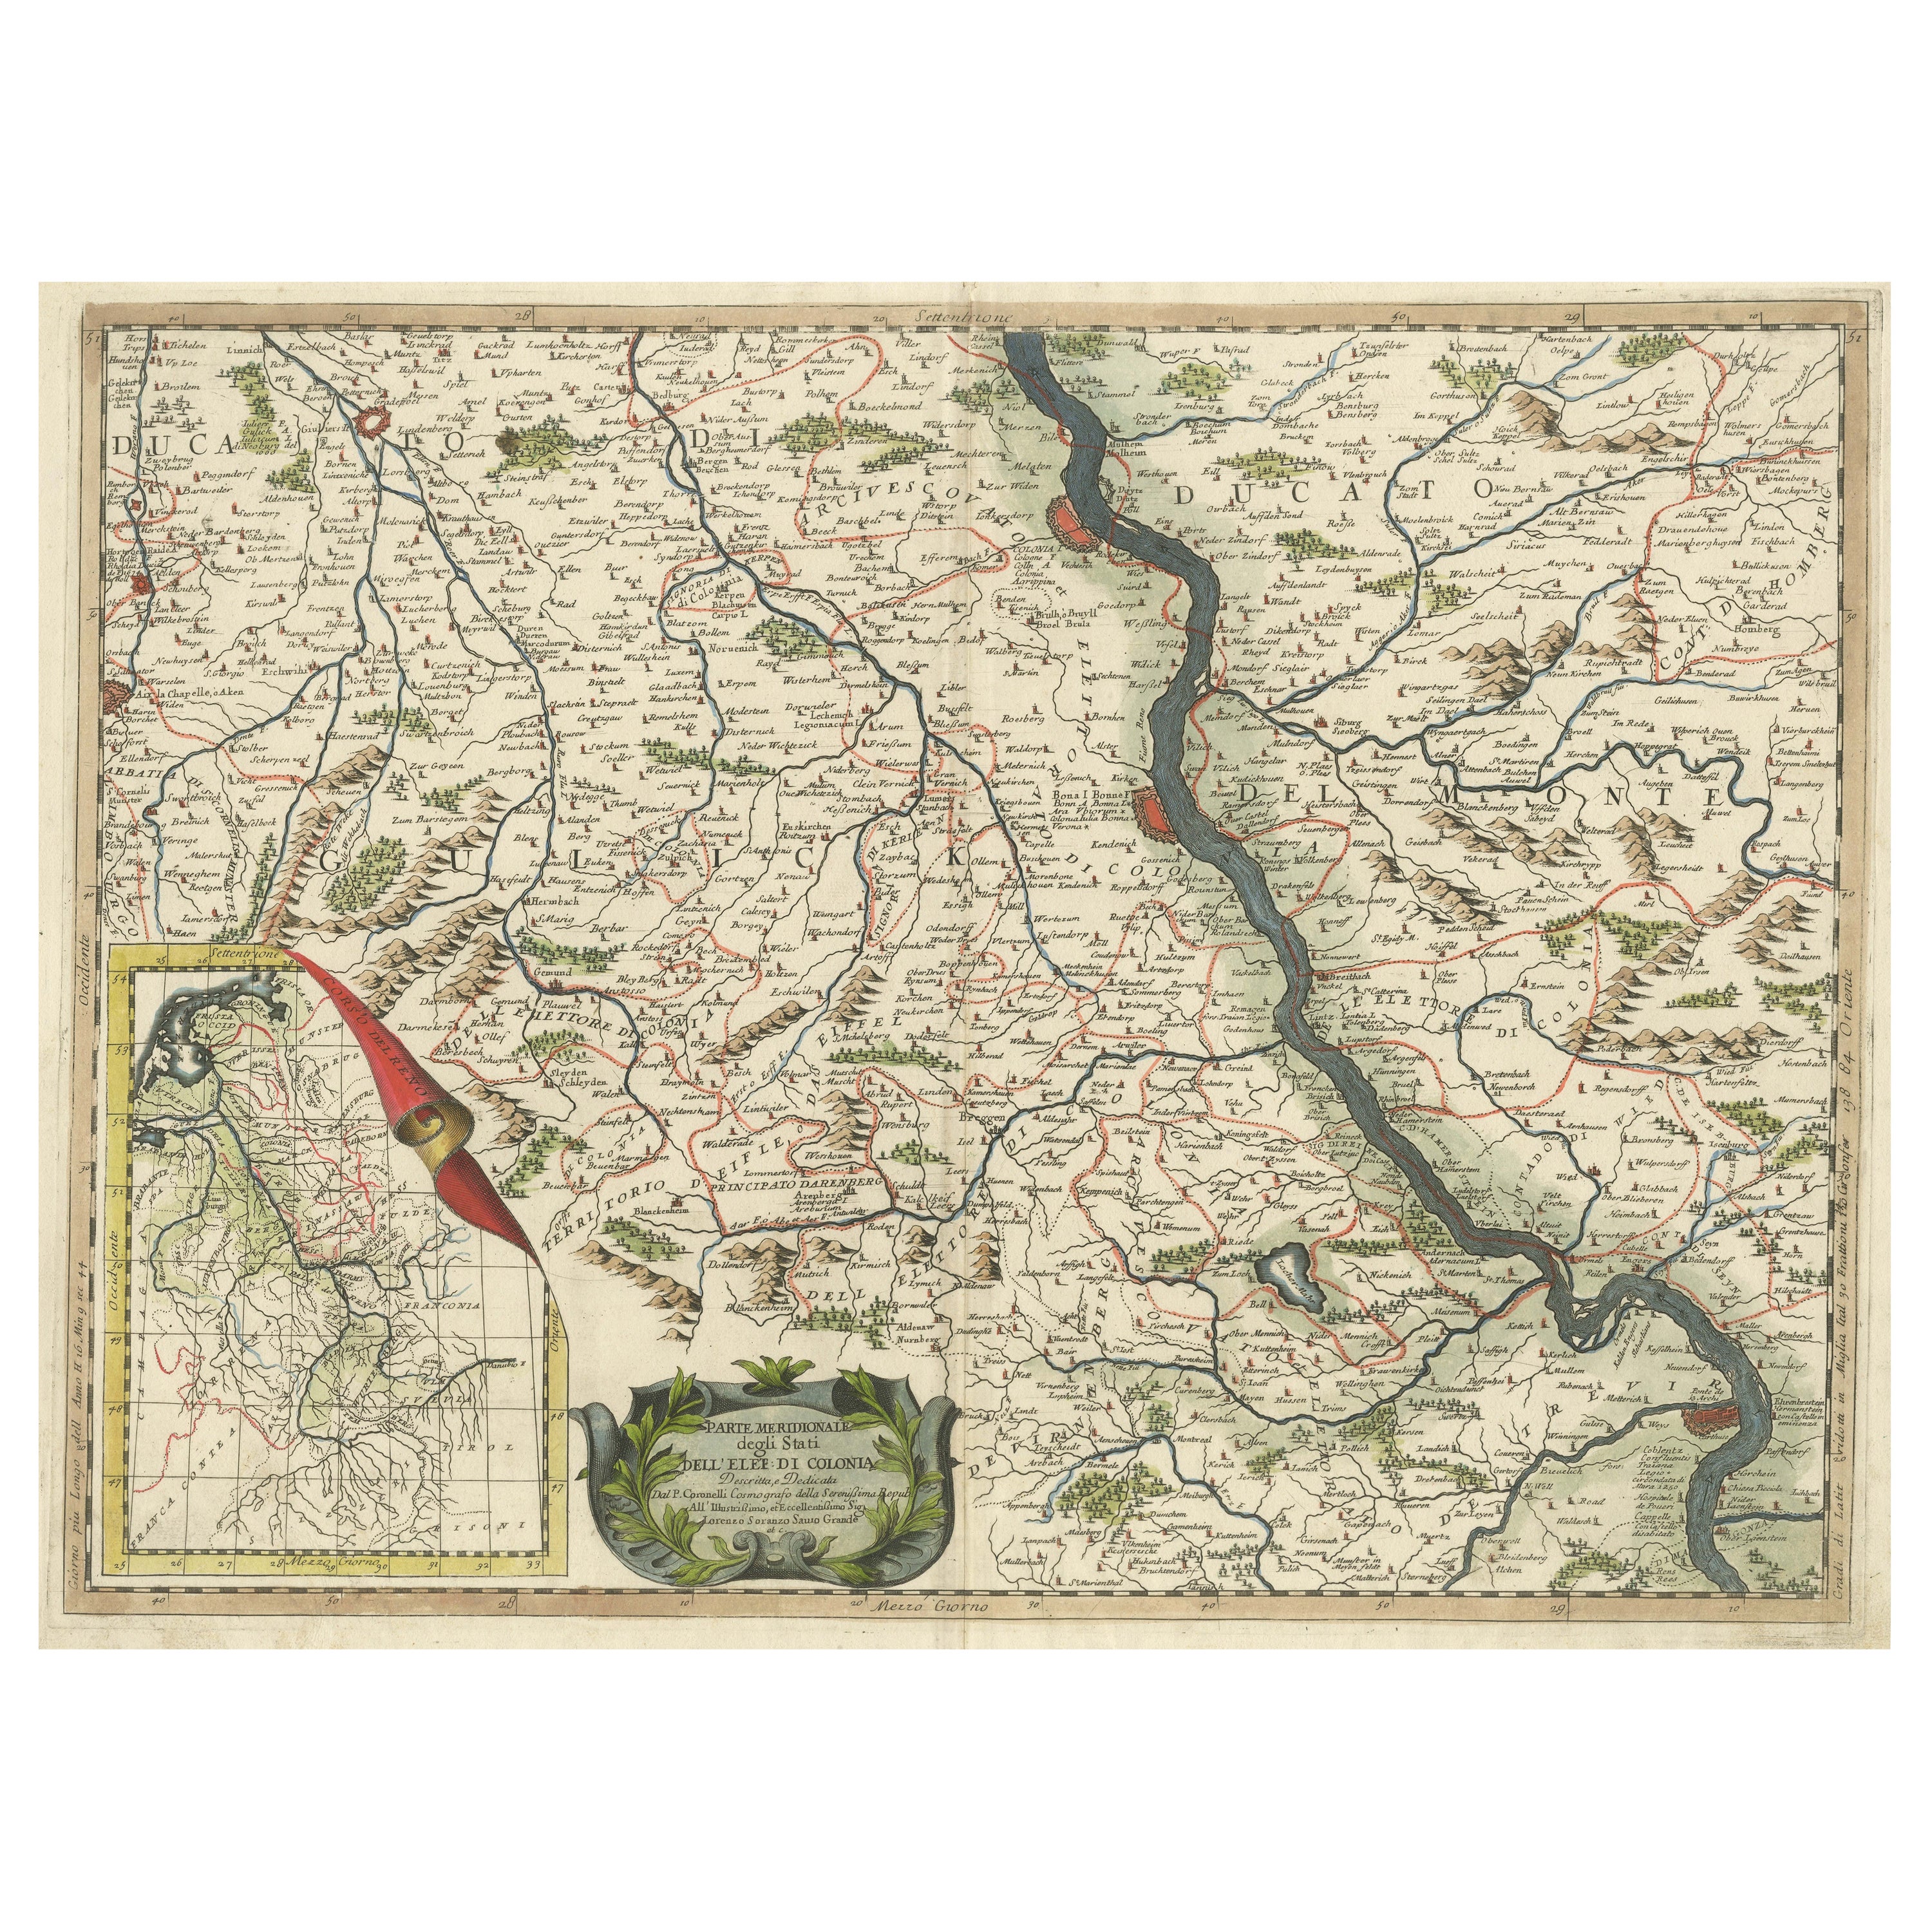 Antique Map of the course of the Rhine from Lahnstein to Rheinkassel, Germany